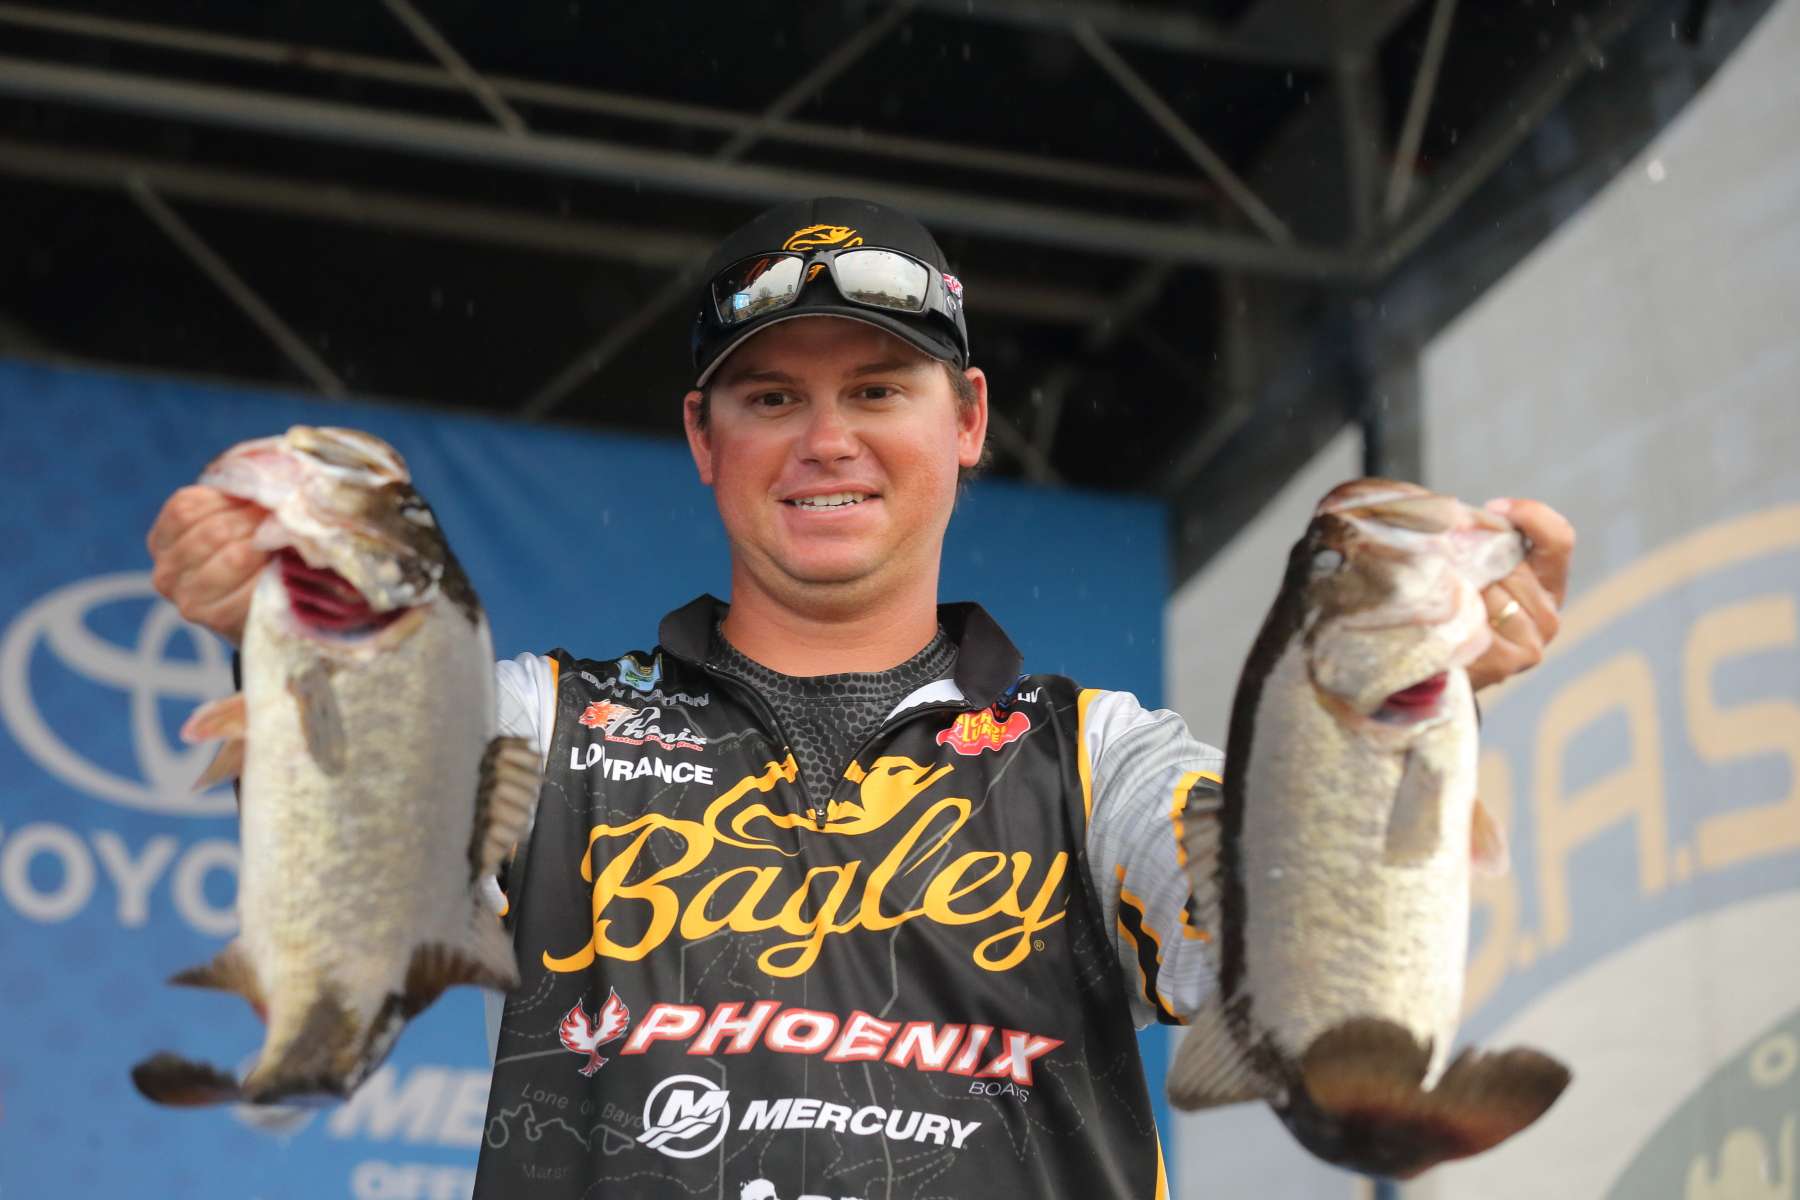 Elite Series rookie Drew Benton was a popular Fantasy Fishing pick at St. Johns, and for good reason. The Floridian - heâs from Panama City -- started with 22-15, faltered with 9-14, then busted a pair of 20-pound bags to stay in the hunt.